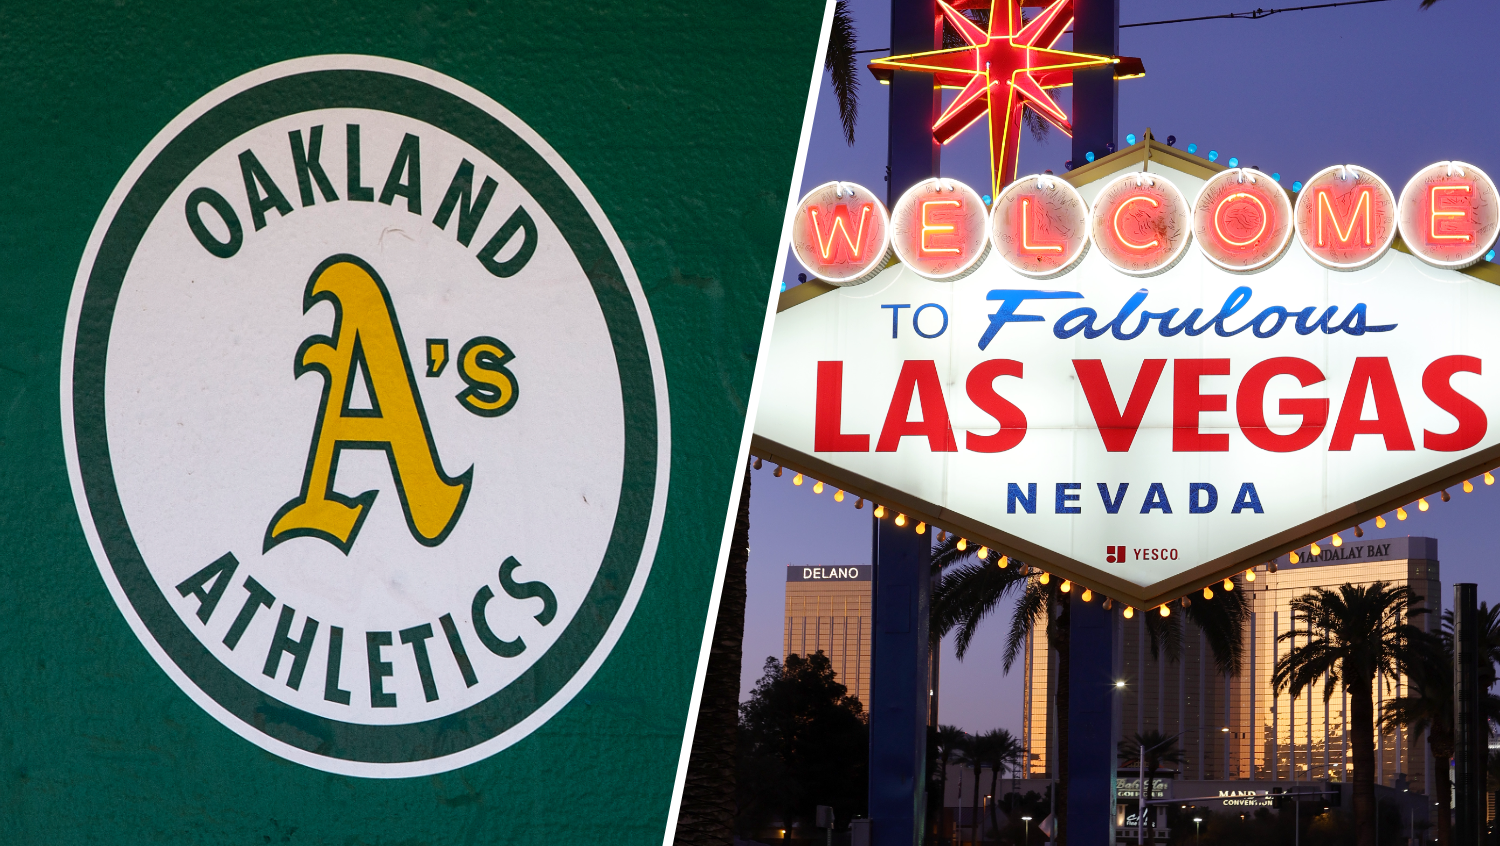 Who's ready to party like it's 1968? - Oakland Athletics